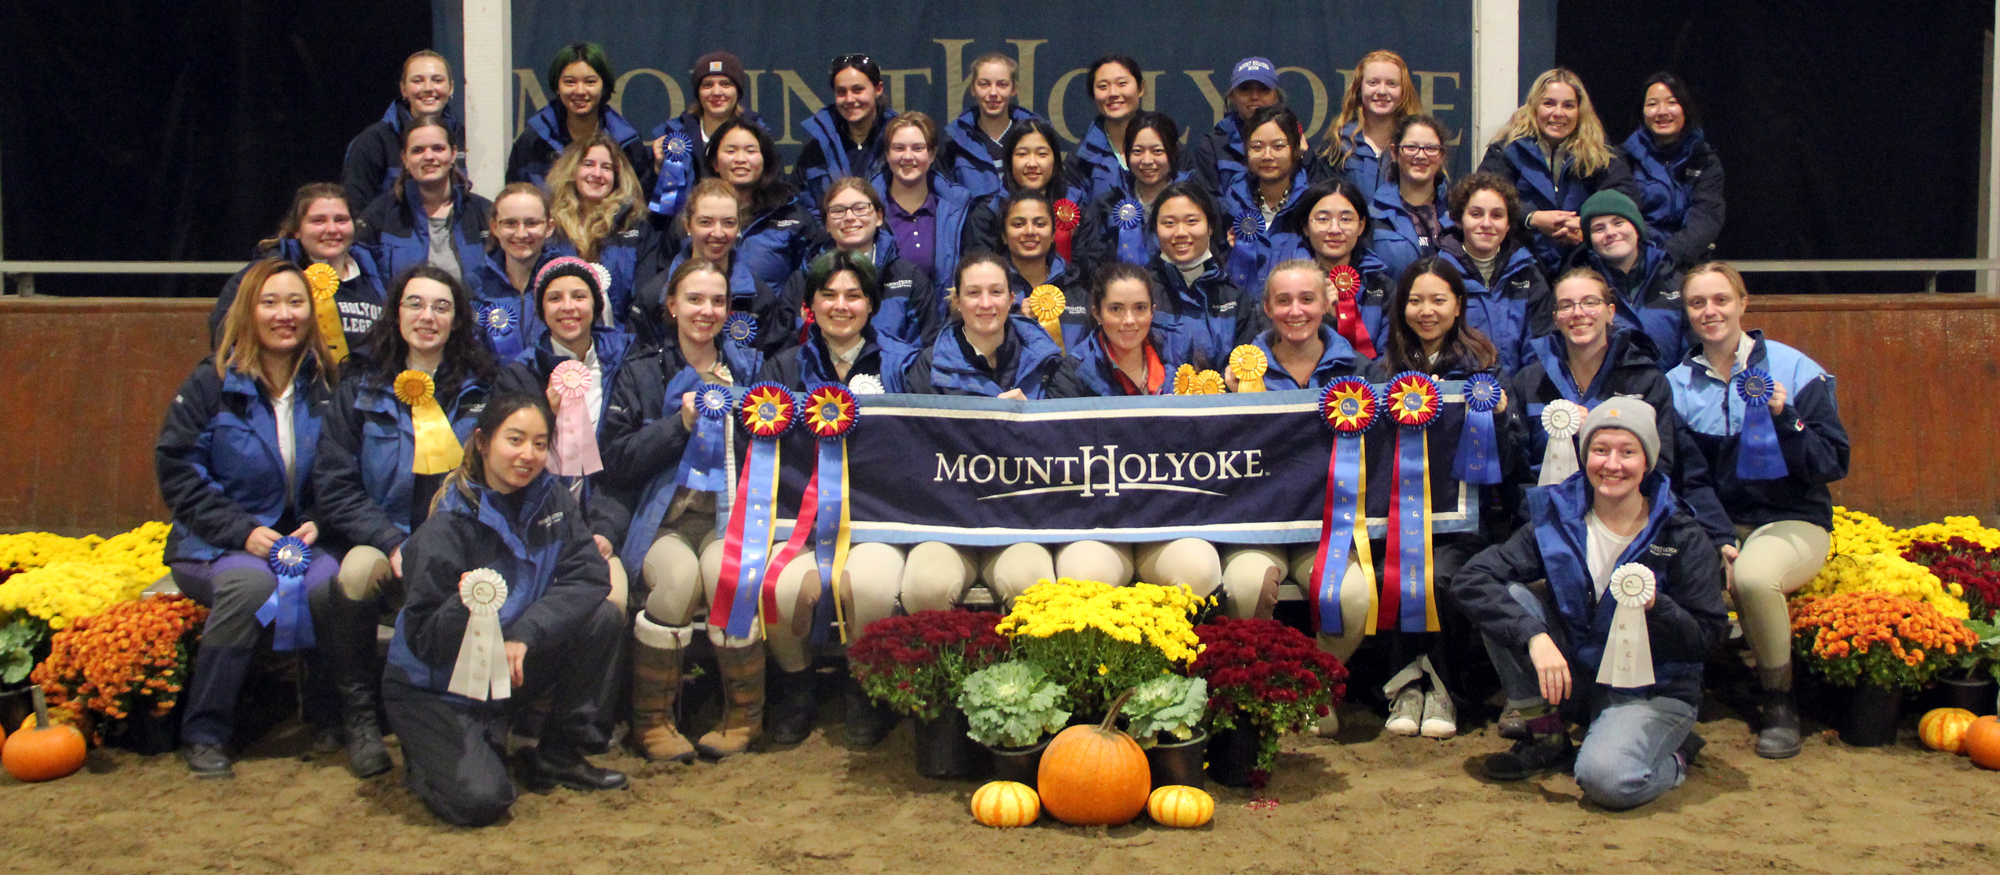 The Mount Holyoke Show on Oct. 29, 2022 concluded with the host Lyons winning their third consecutive High Point College award in as many shows.